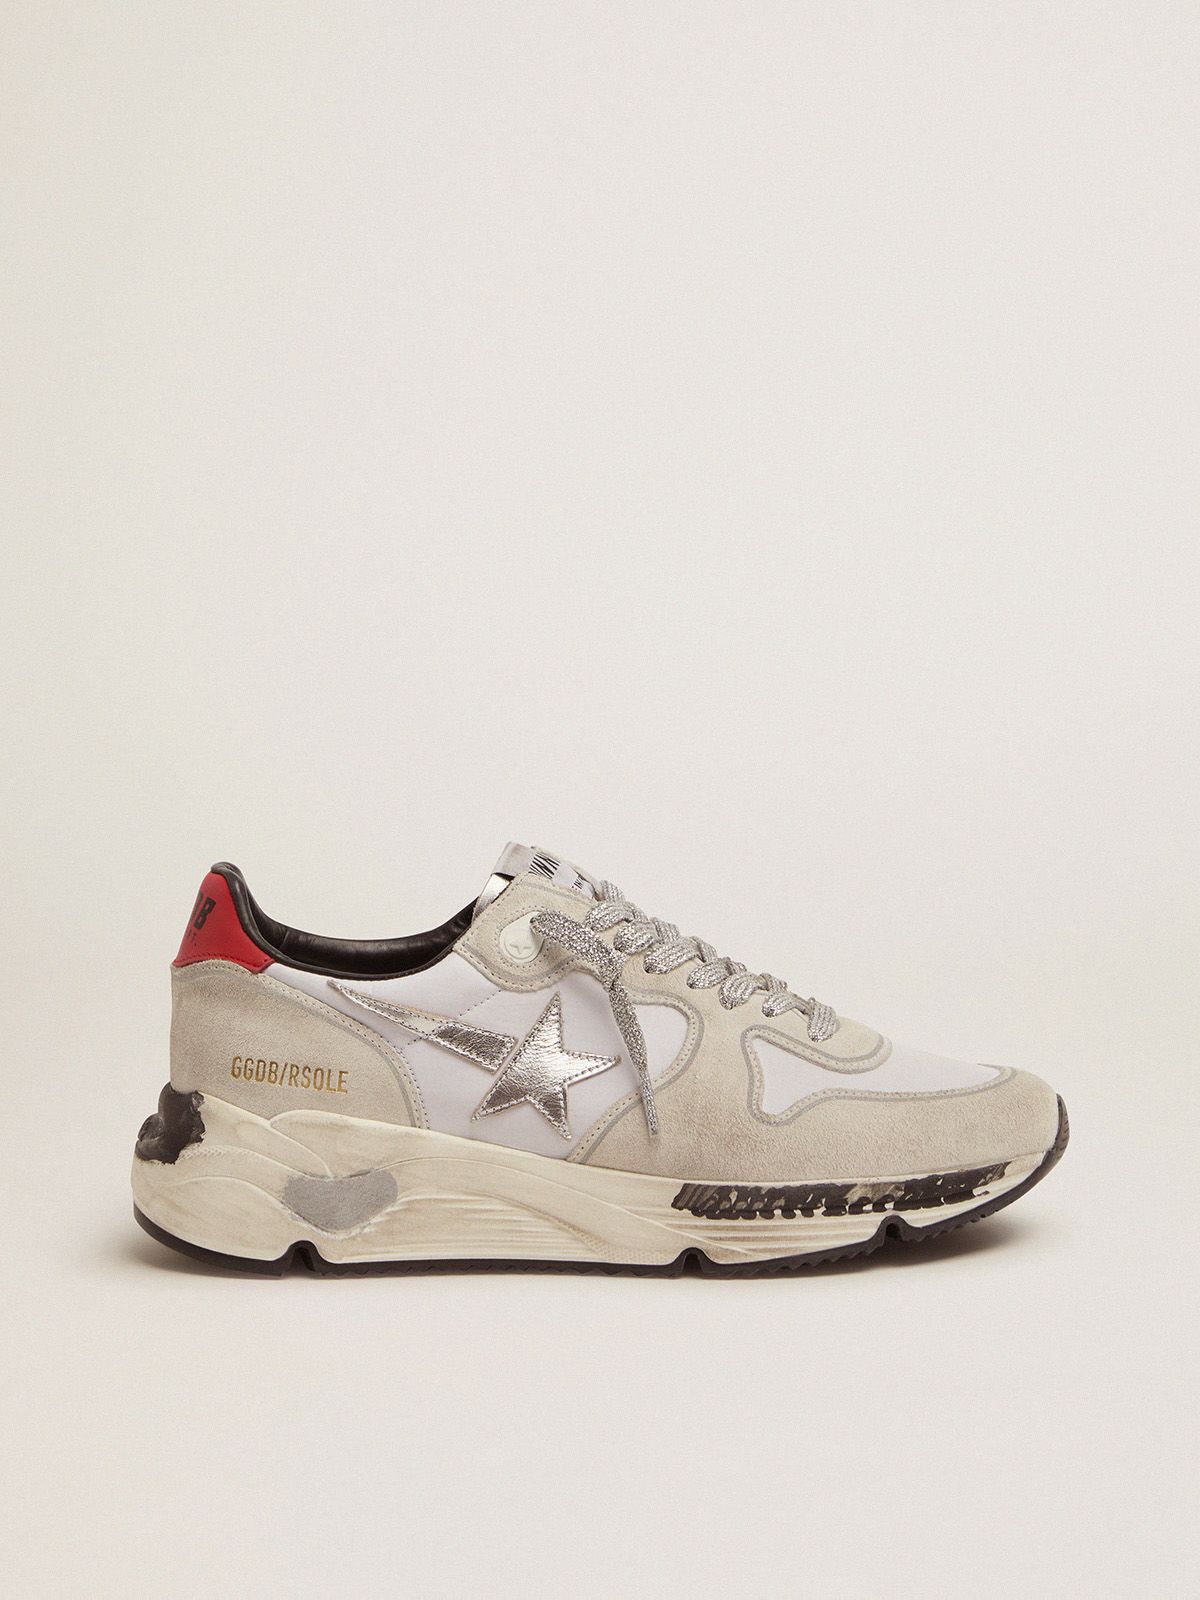 Habitat Regnskab Symphony Running Sole sneakers with red heel tab and silver star | Golden Goose